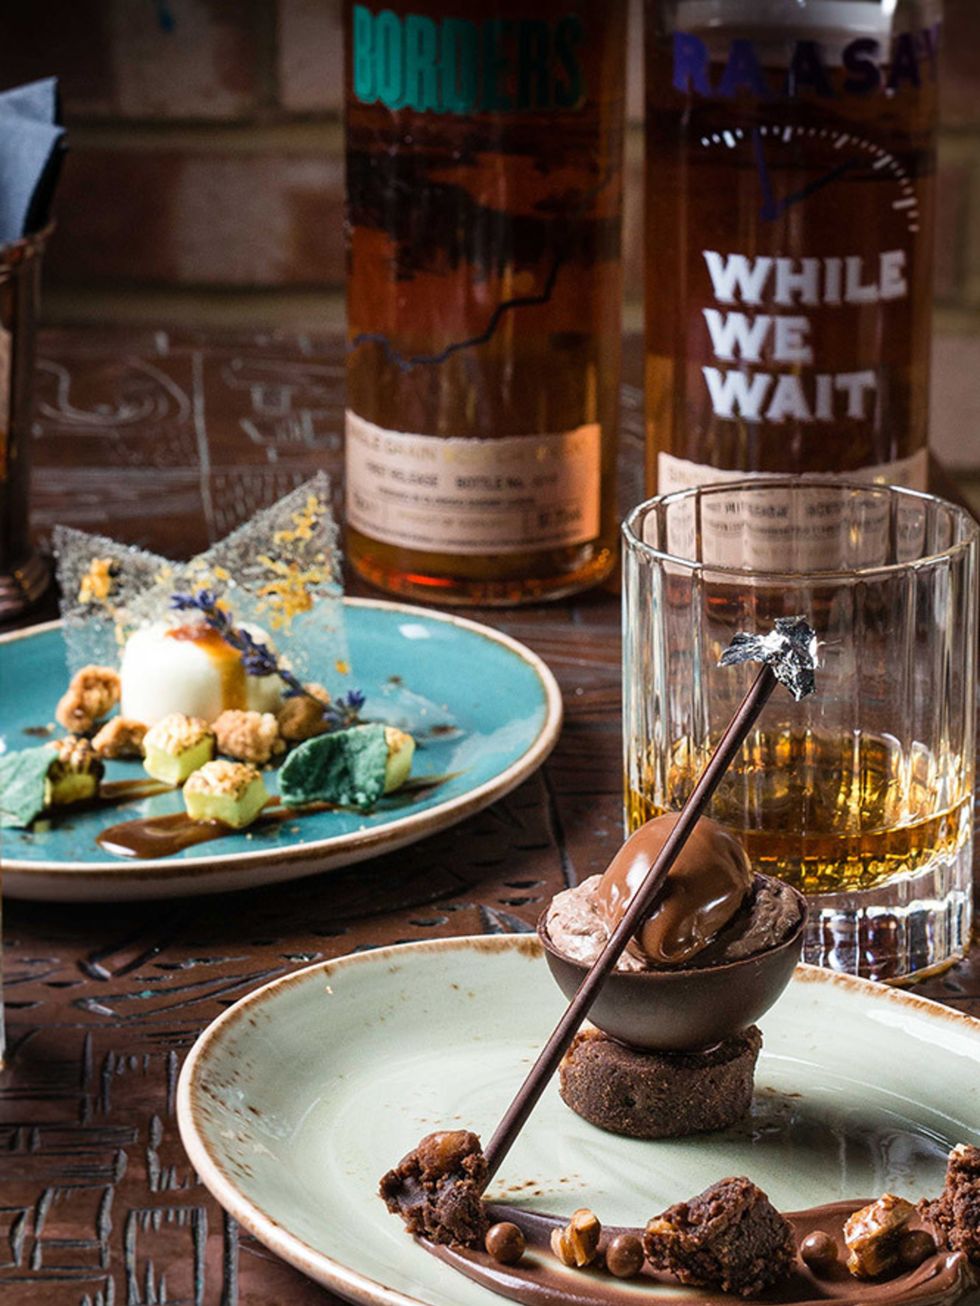 <p>FOOD: <a href="https://billetto.co.uk/en/events/scotch-whisky-dessert-tasting" target="_blank">Whisky & Dessert Tasting at Basement Sate </a></p>

<p>Everyone knows that the best bit of dinner is when the serious sugar and serious alcohol comes out. An